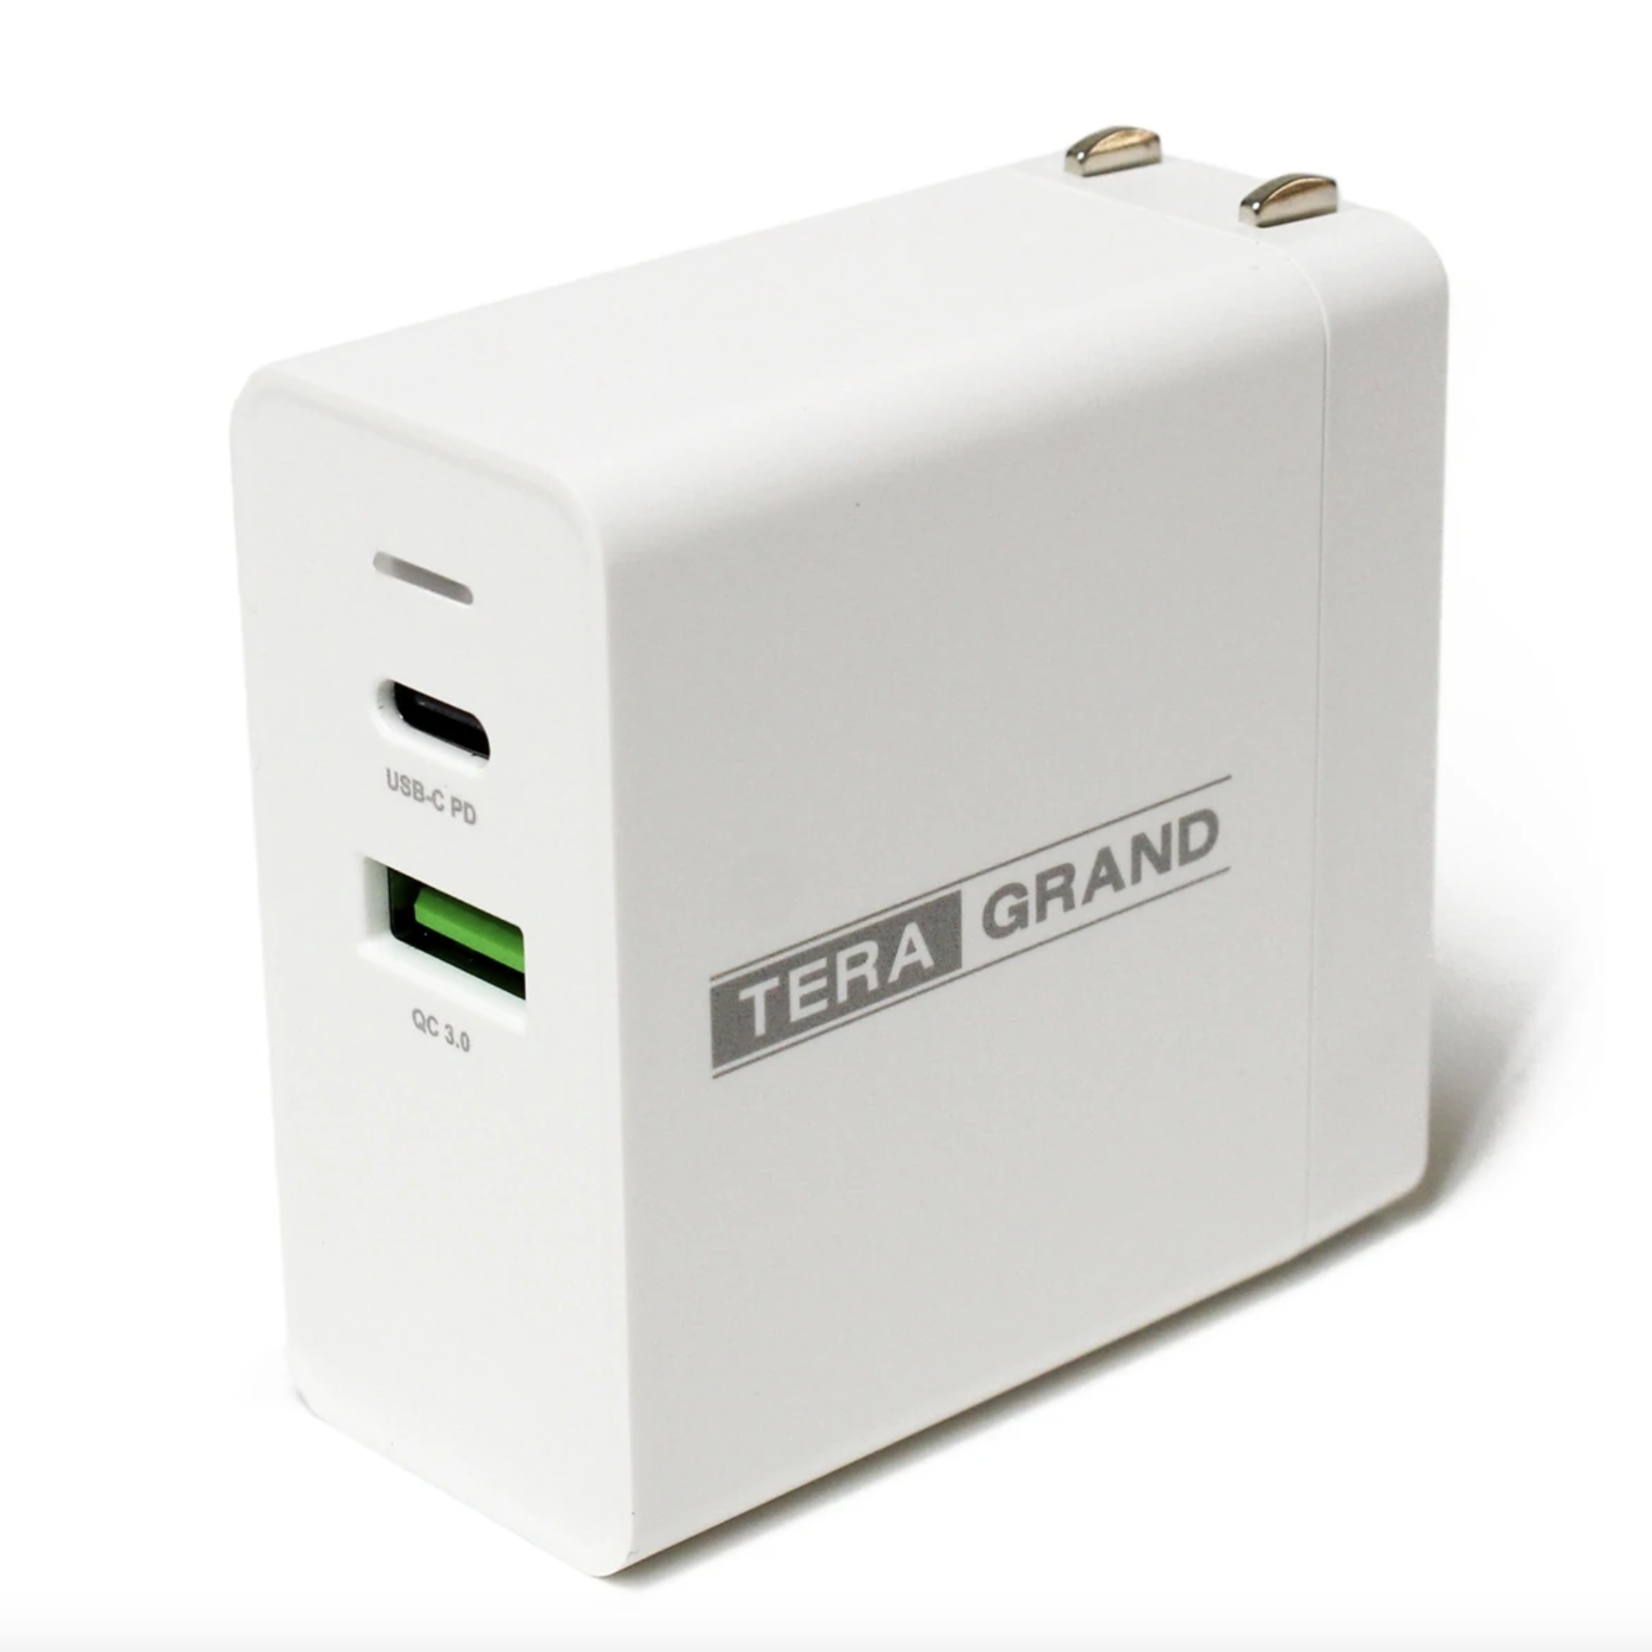 Tera Grand 36W USB-C Wall Charger with 18W USB-C Power Delivery PD 3.0 Port and 18W QC3.0 USB-A Port